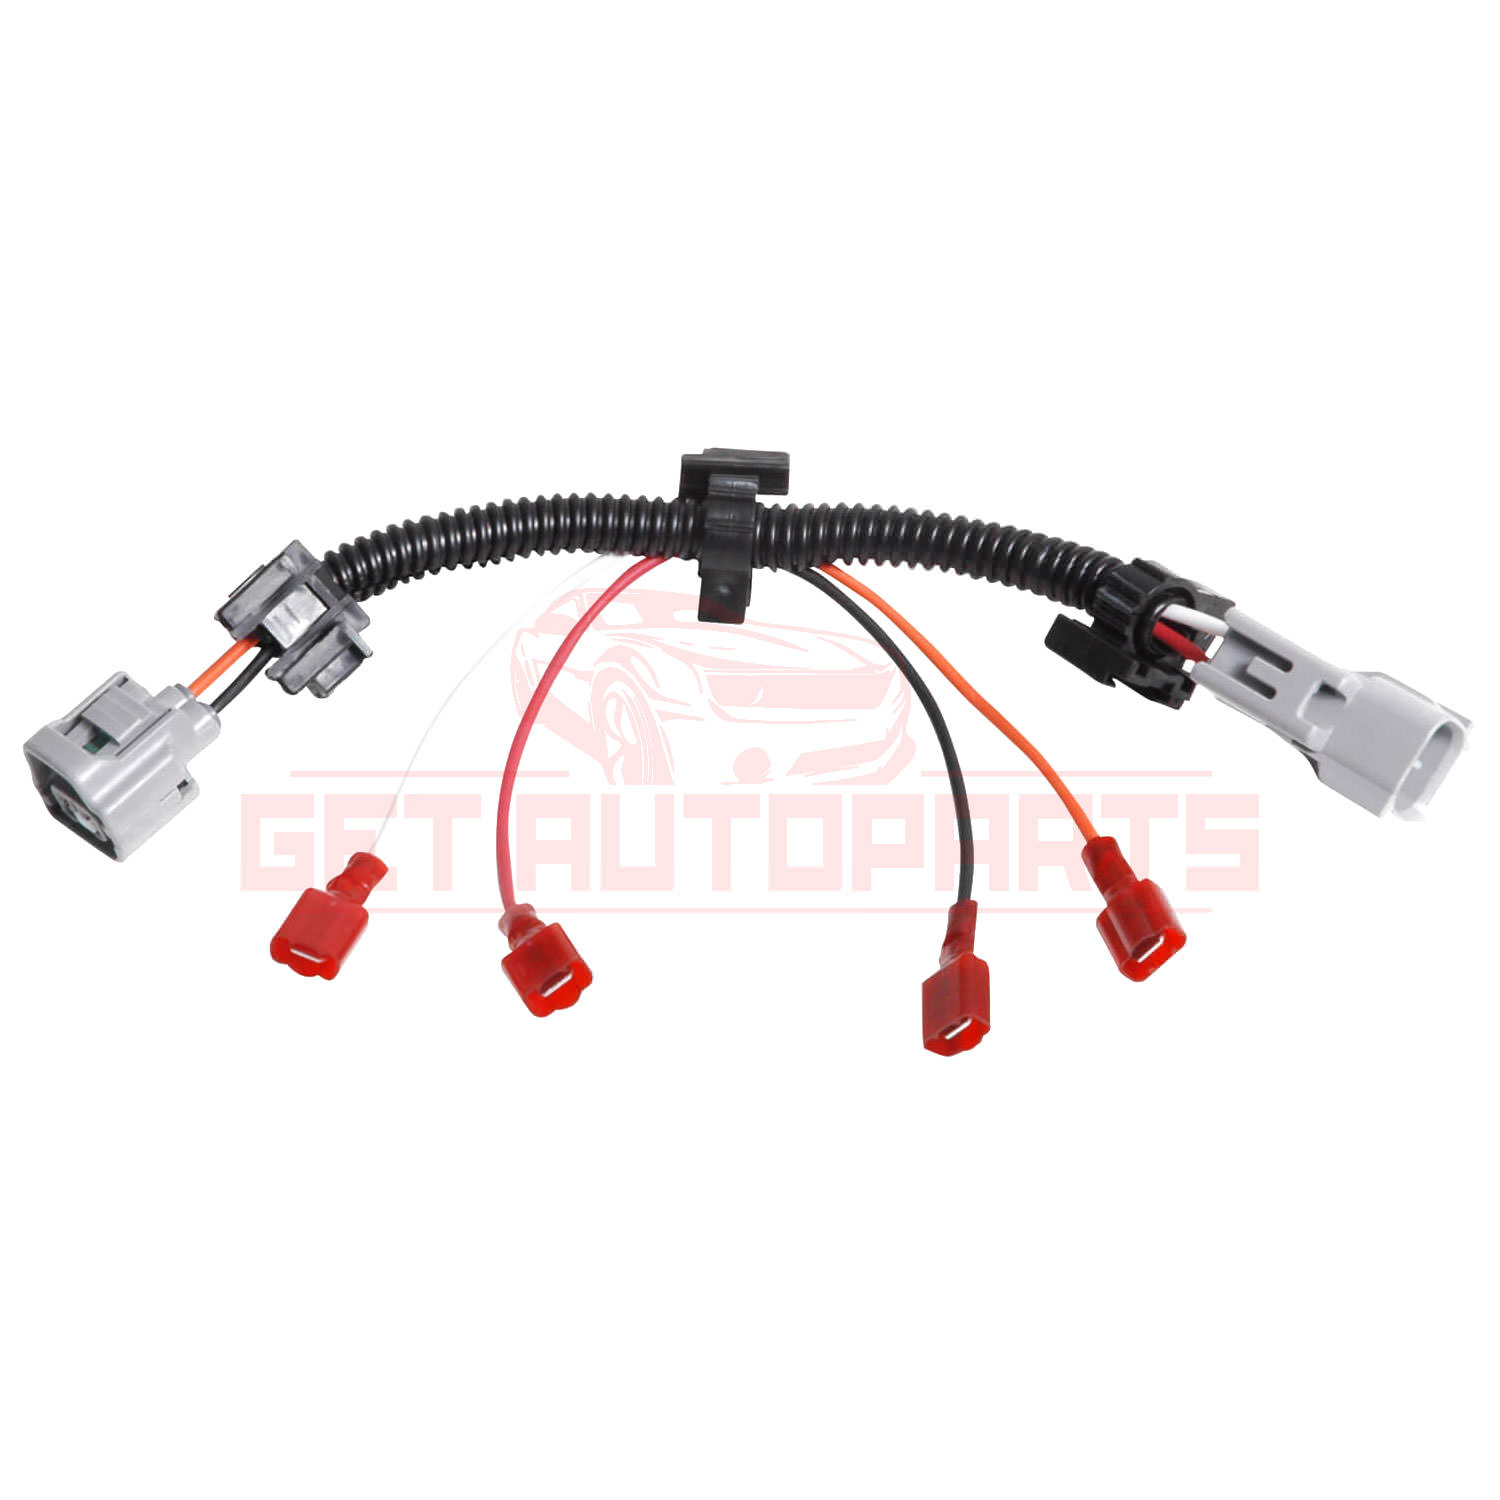 MSD Engine Wiring Harness for Dodge Grand Caravan 1998-2003 | eBay 2003 Dodge Caravan Fuel Injector Wiring Harness